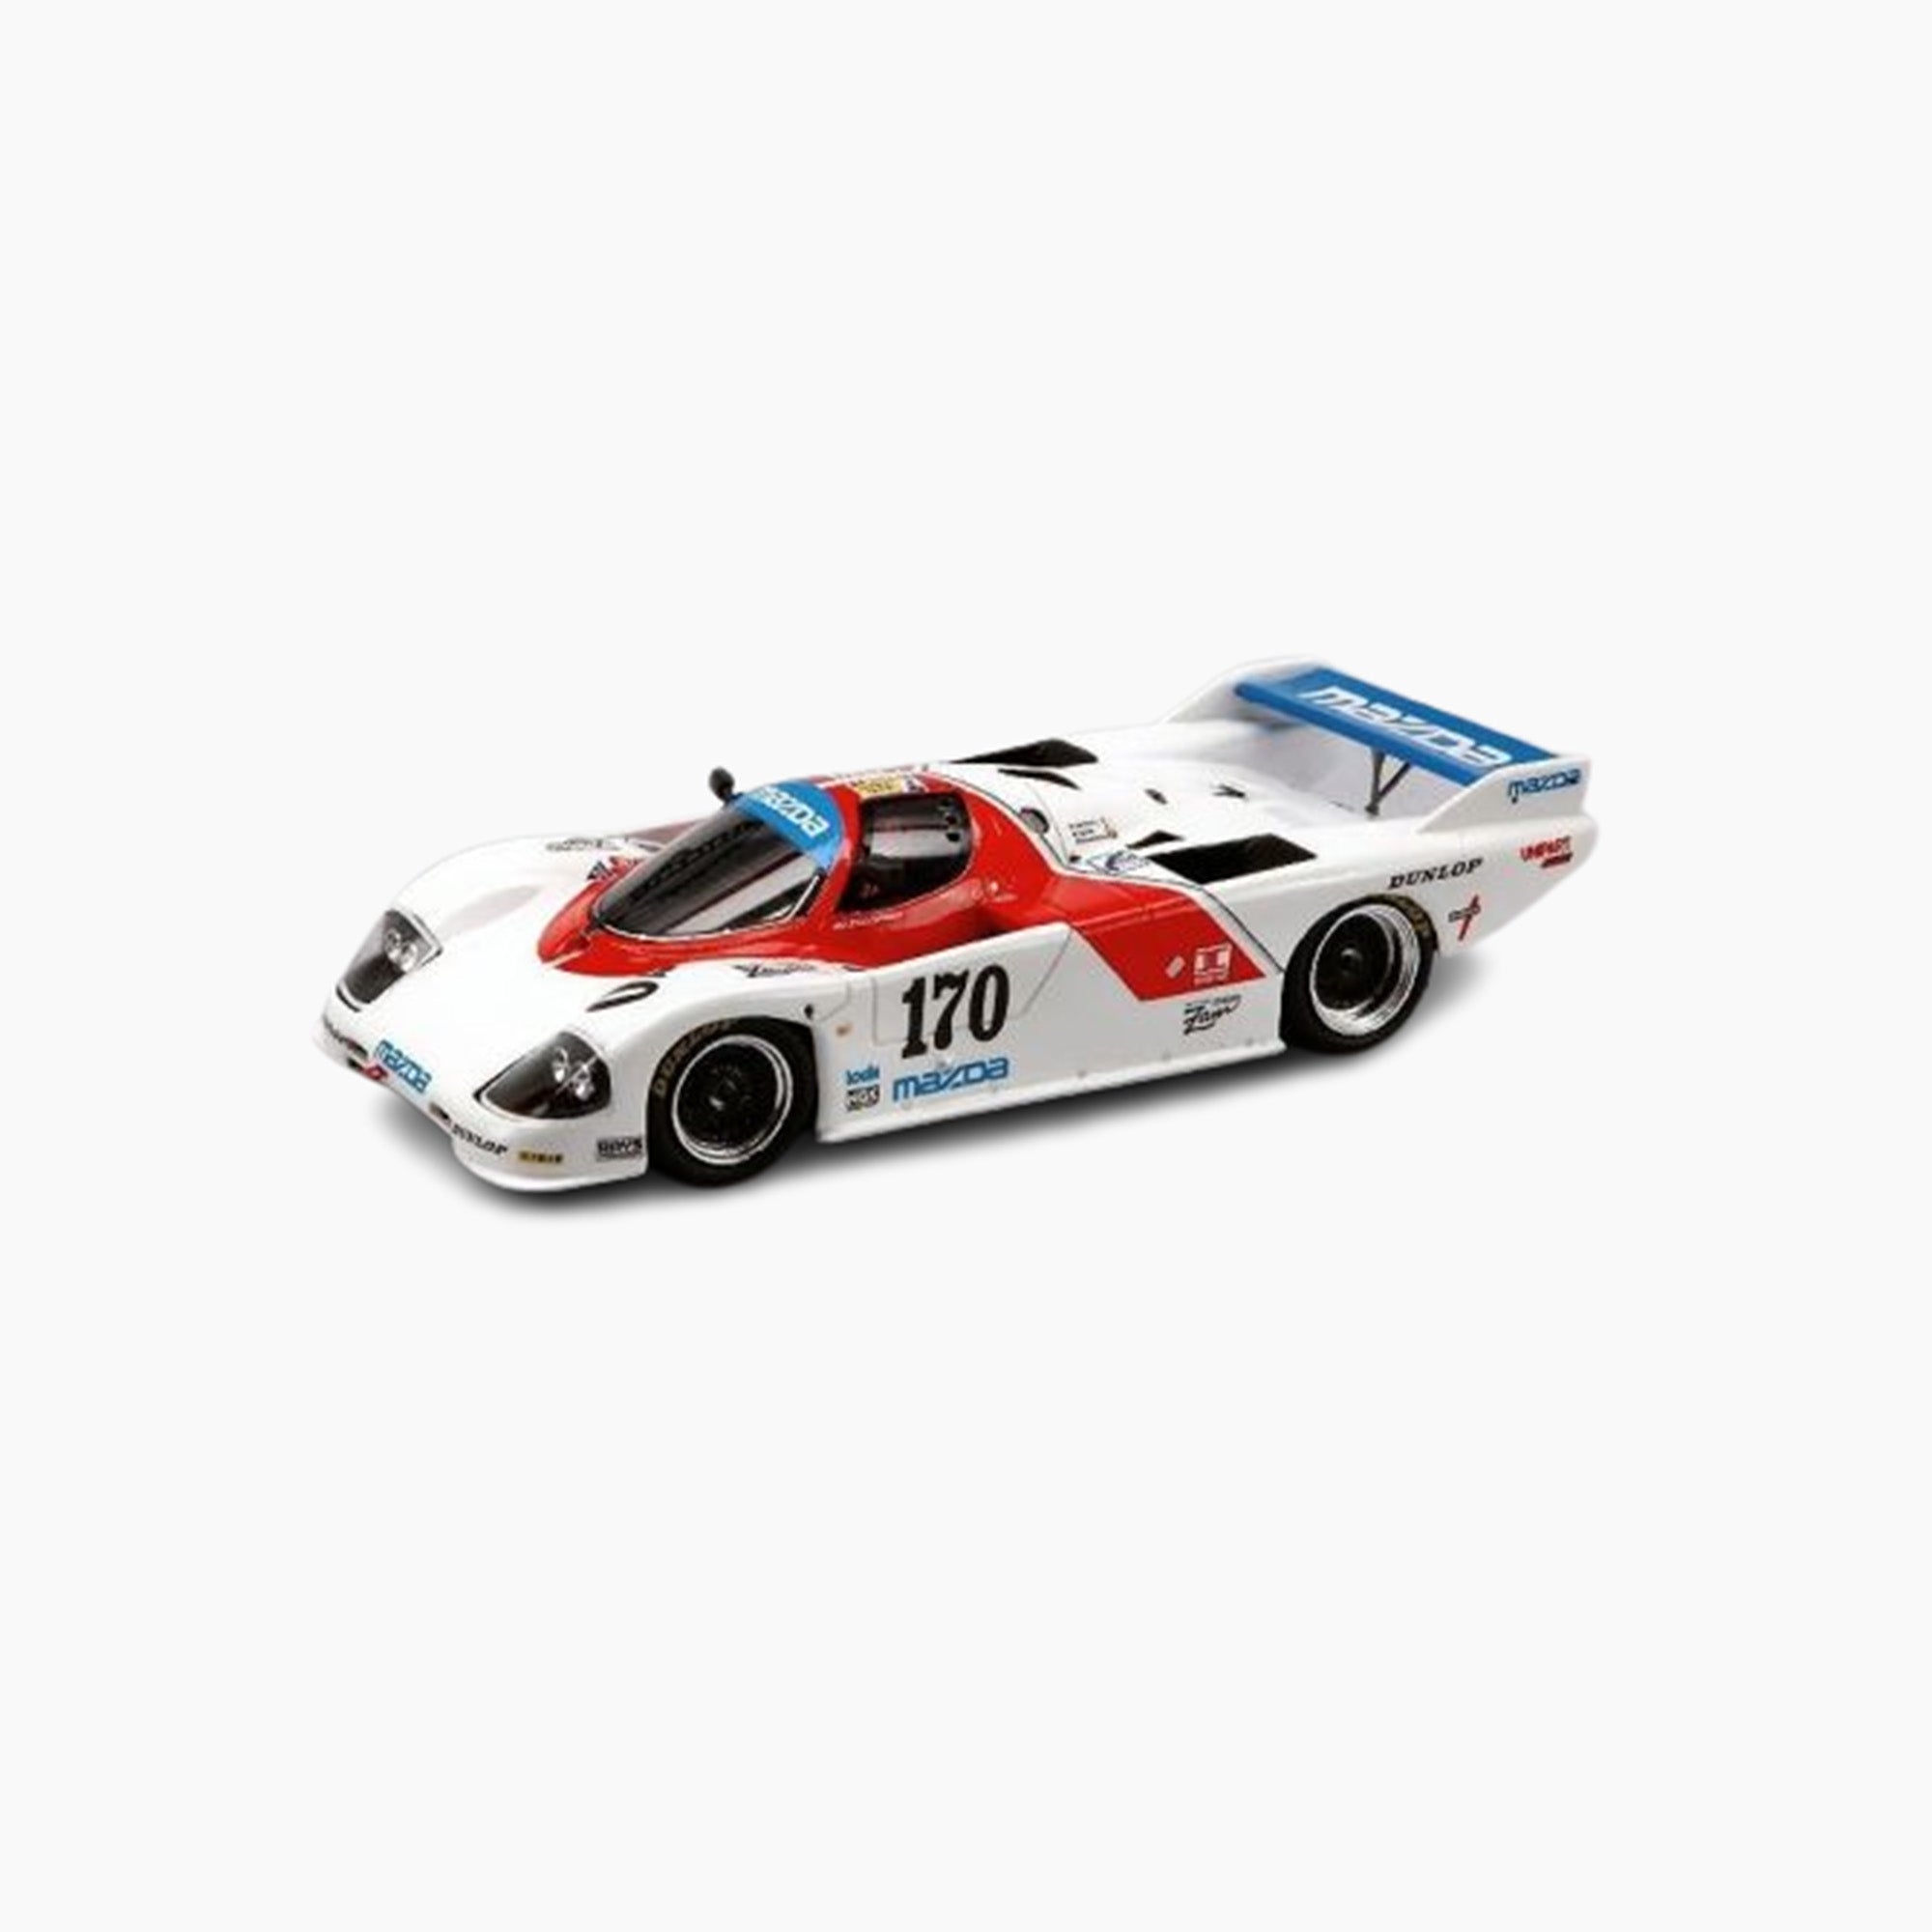 Mazda 757 #170 LM 1986 | 1:43 Scale Model-1:43 Scale Model-Spark Models-gpx-store